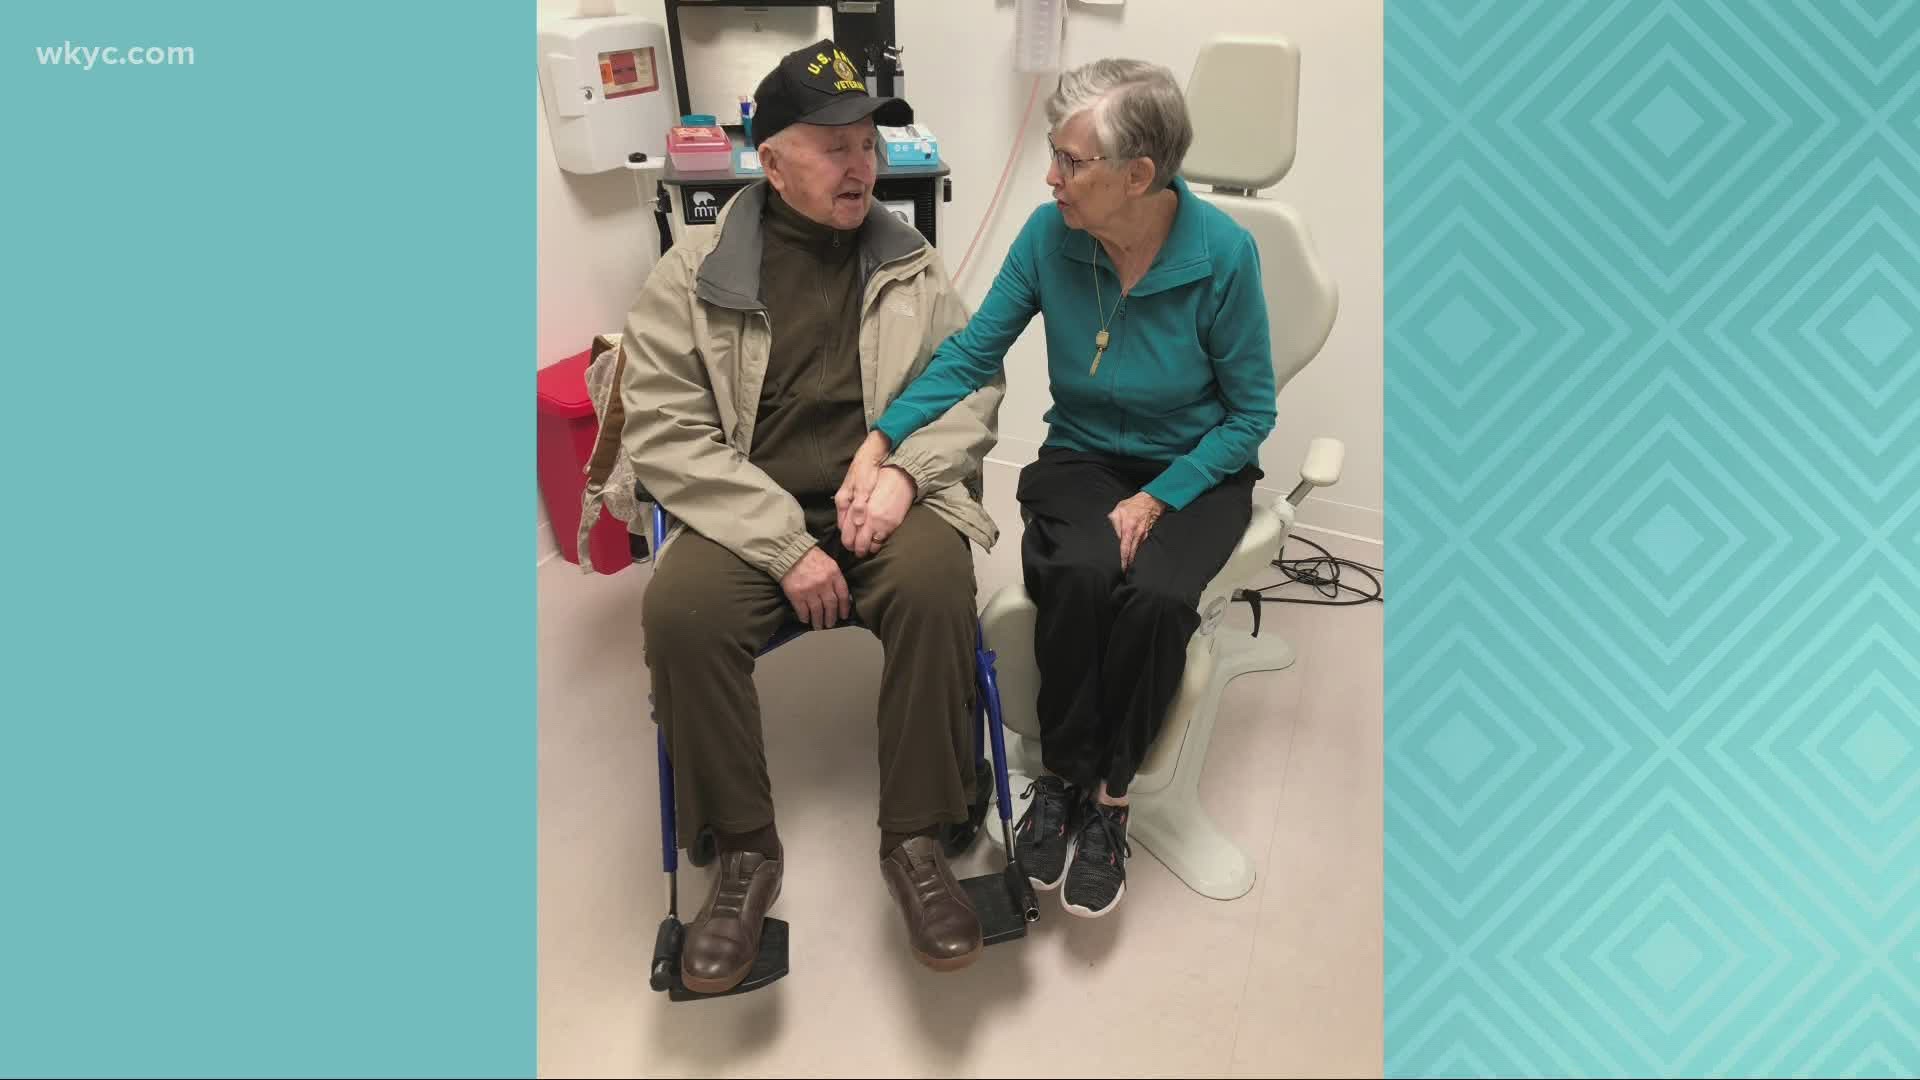 Lindsay Buckingham shares the story of a Holocaust survivor and his wife of 60 years. The pair were reunited after a month apart due to COVID-19.